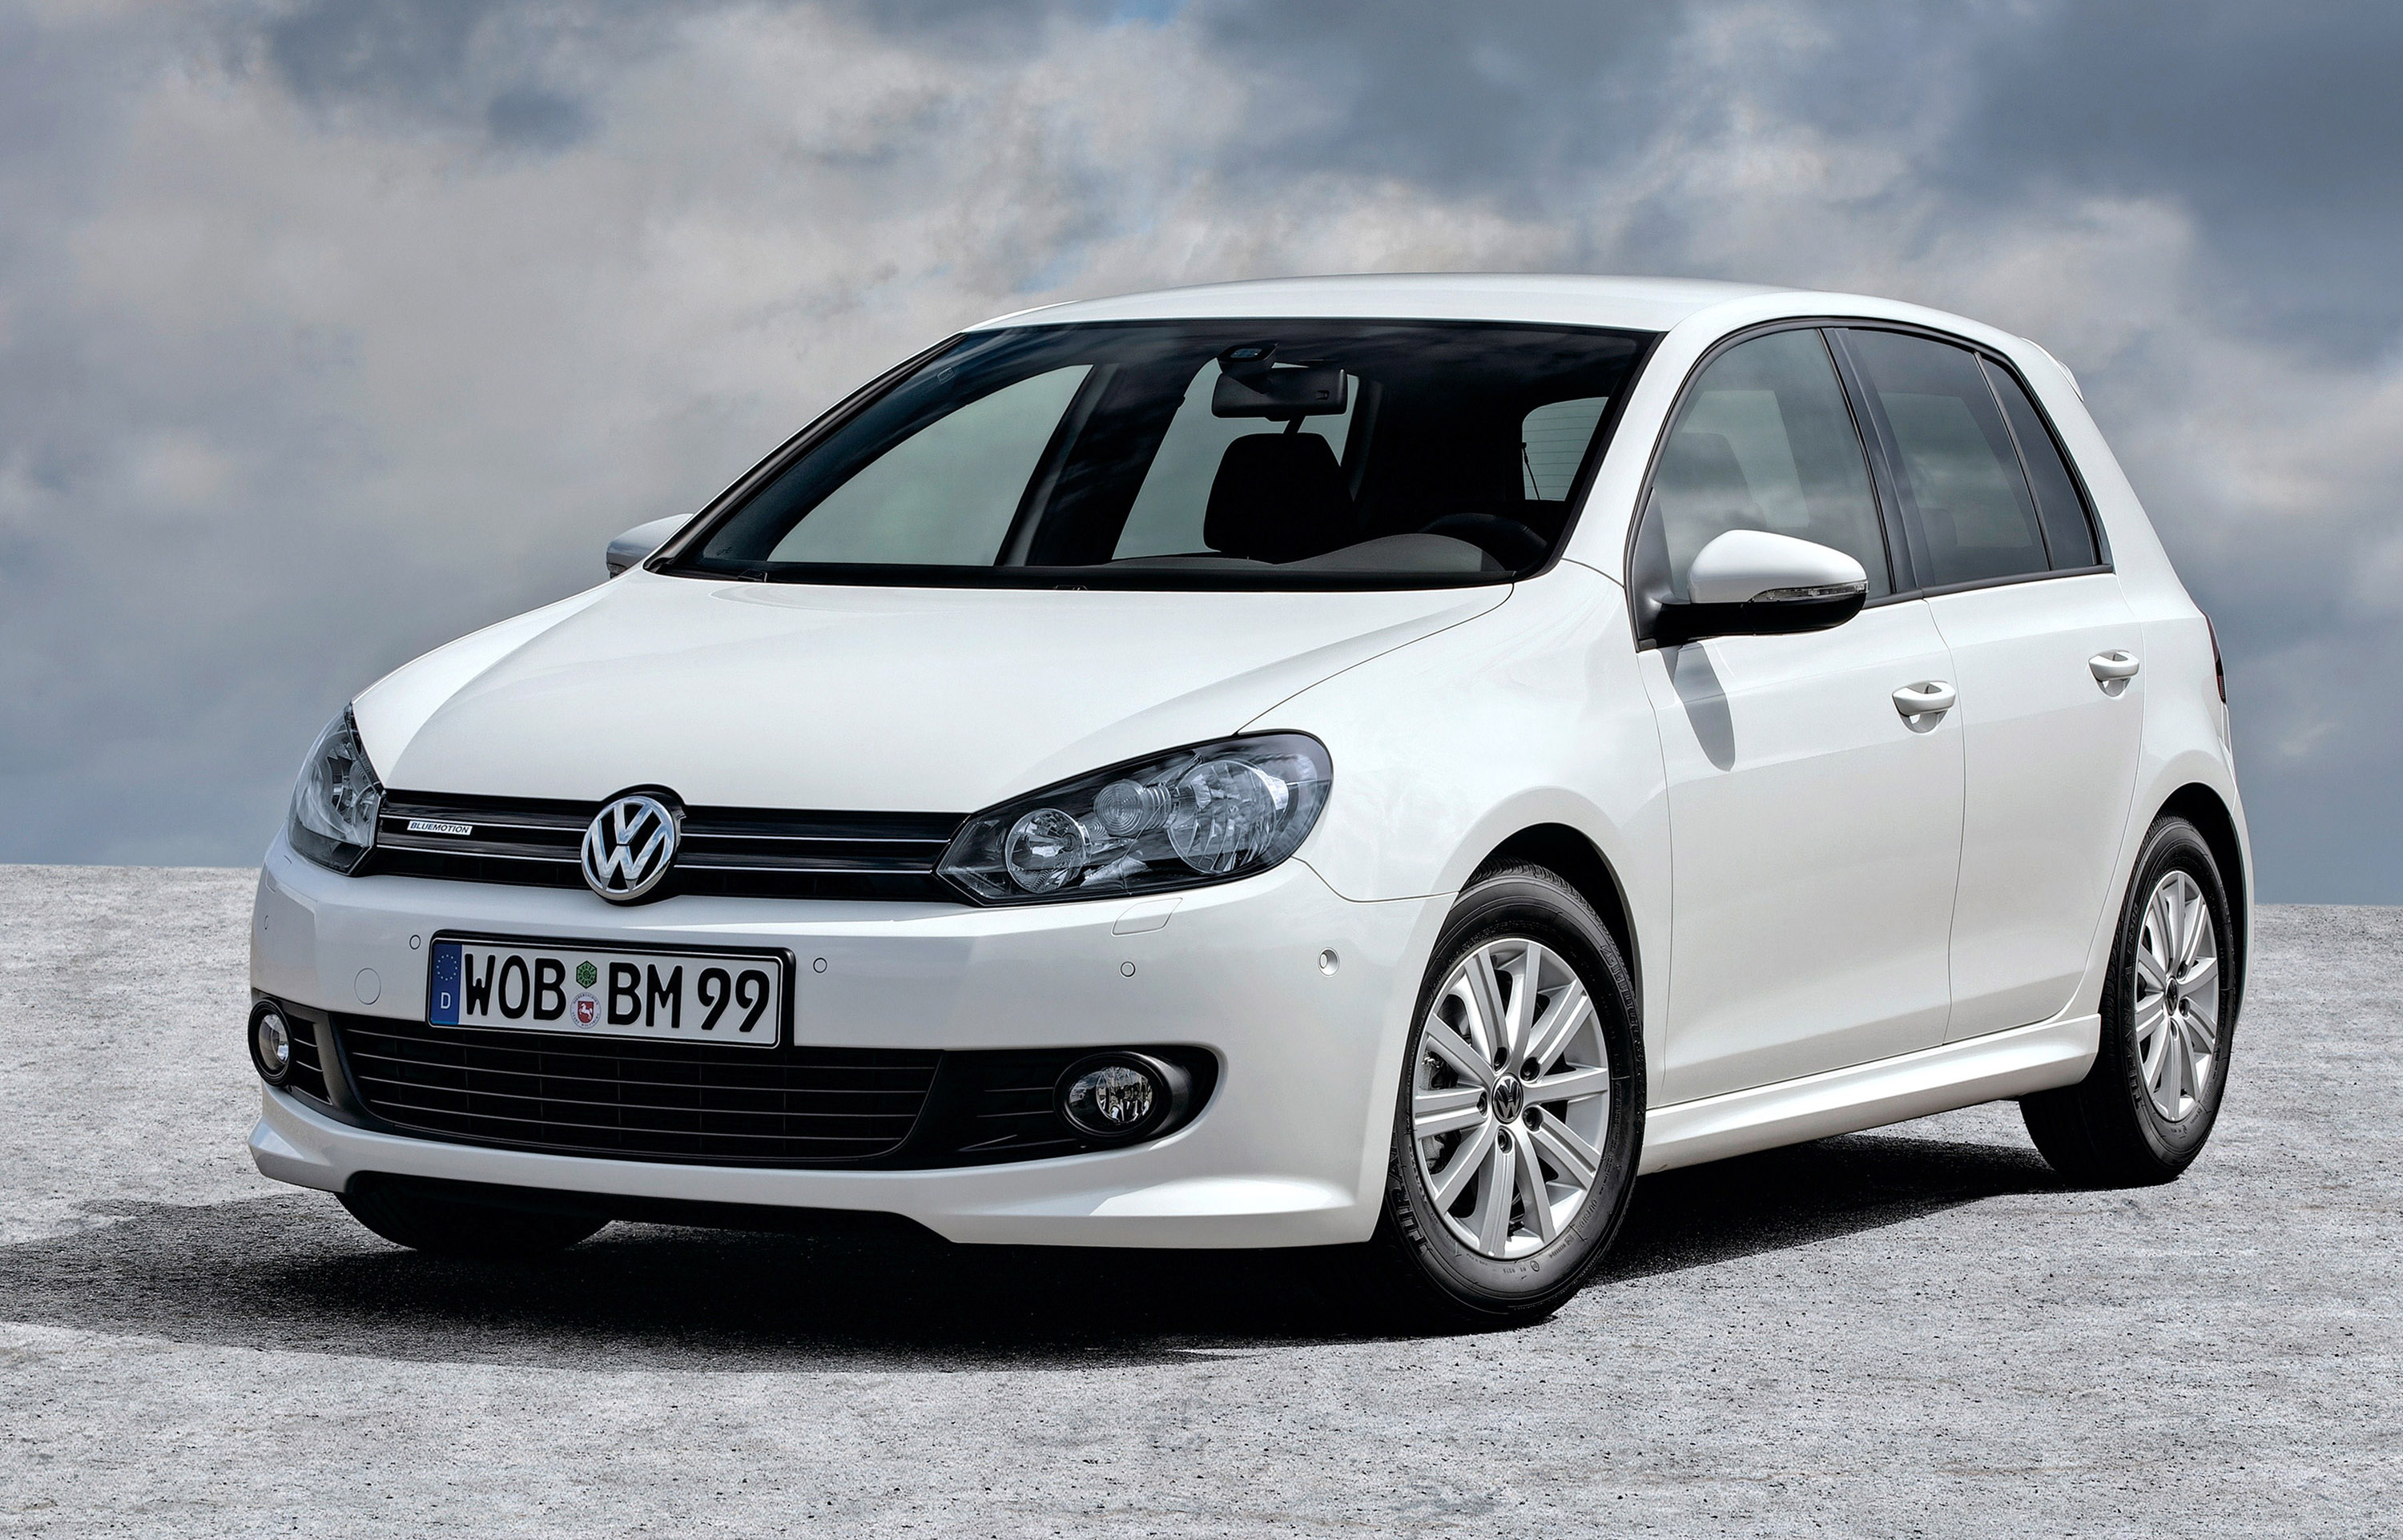 Volkswagen Golf VI Bluemotion awarded Green Car of the Year